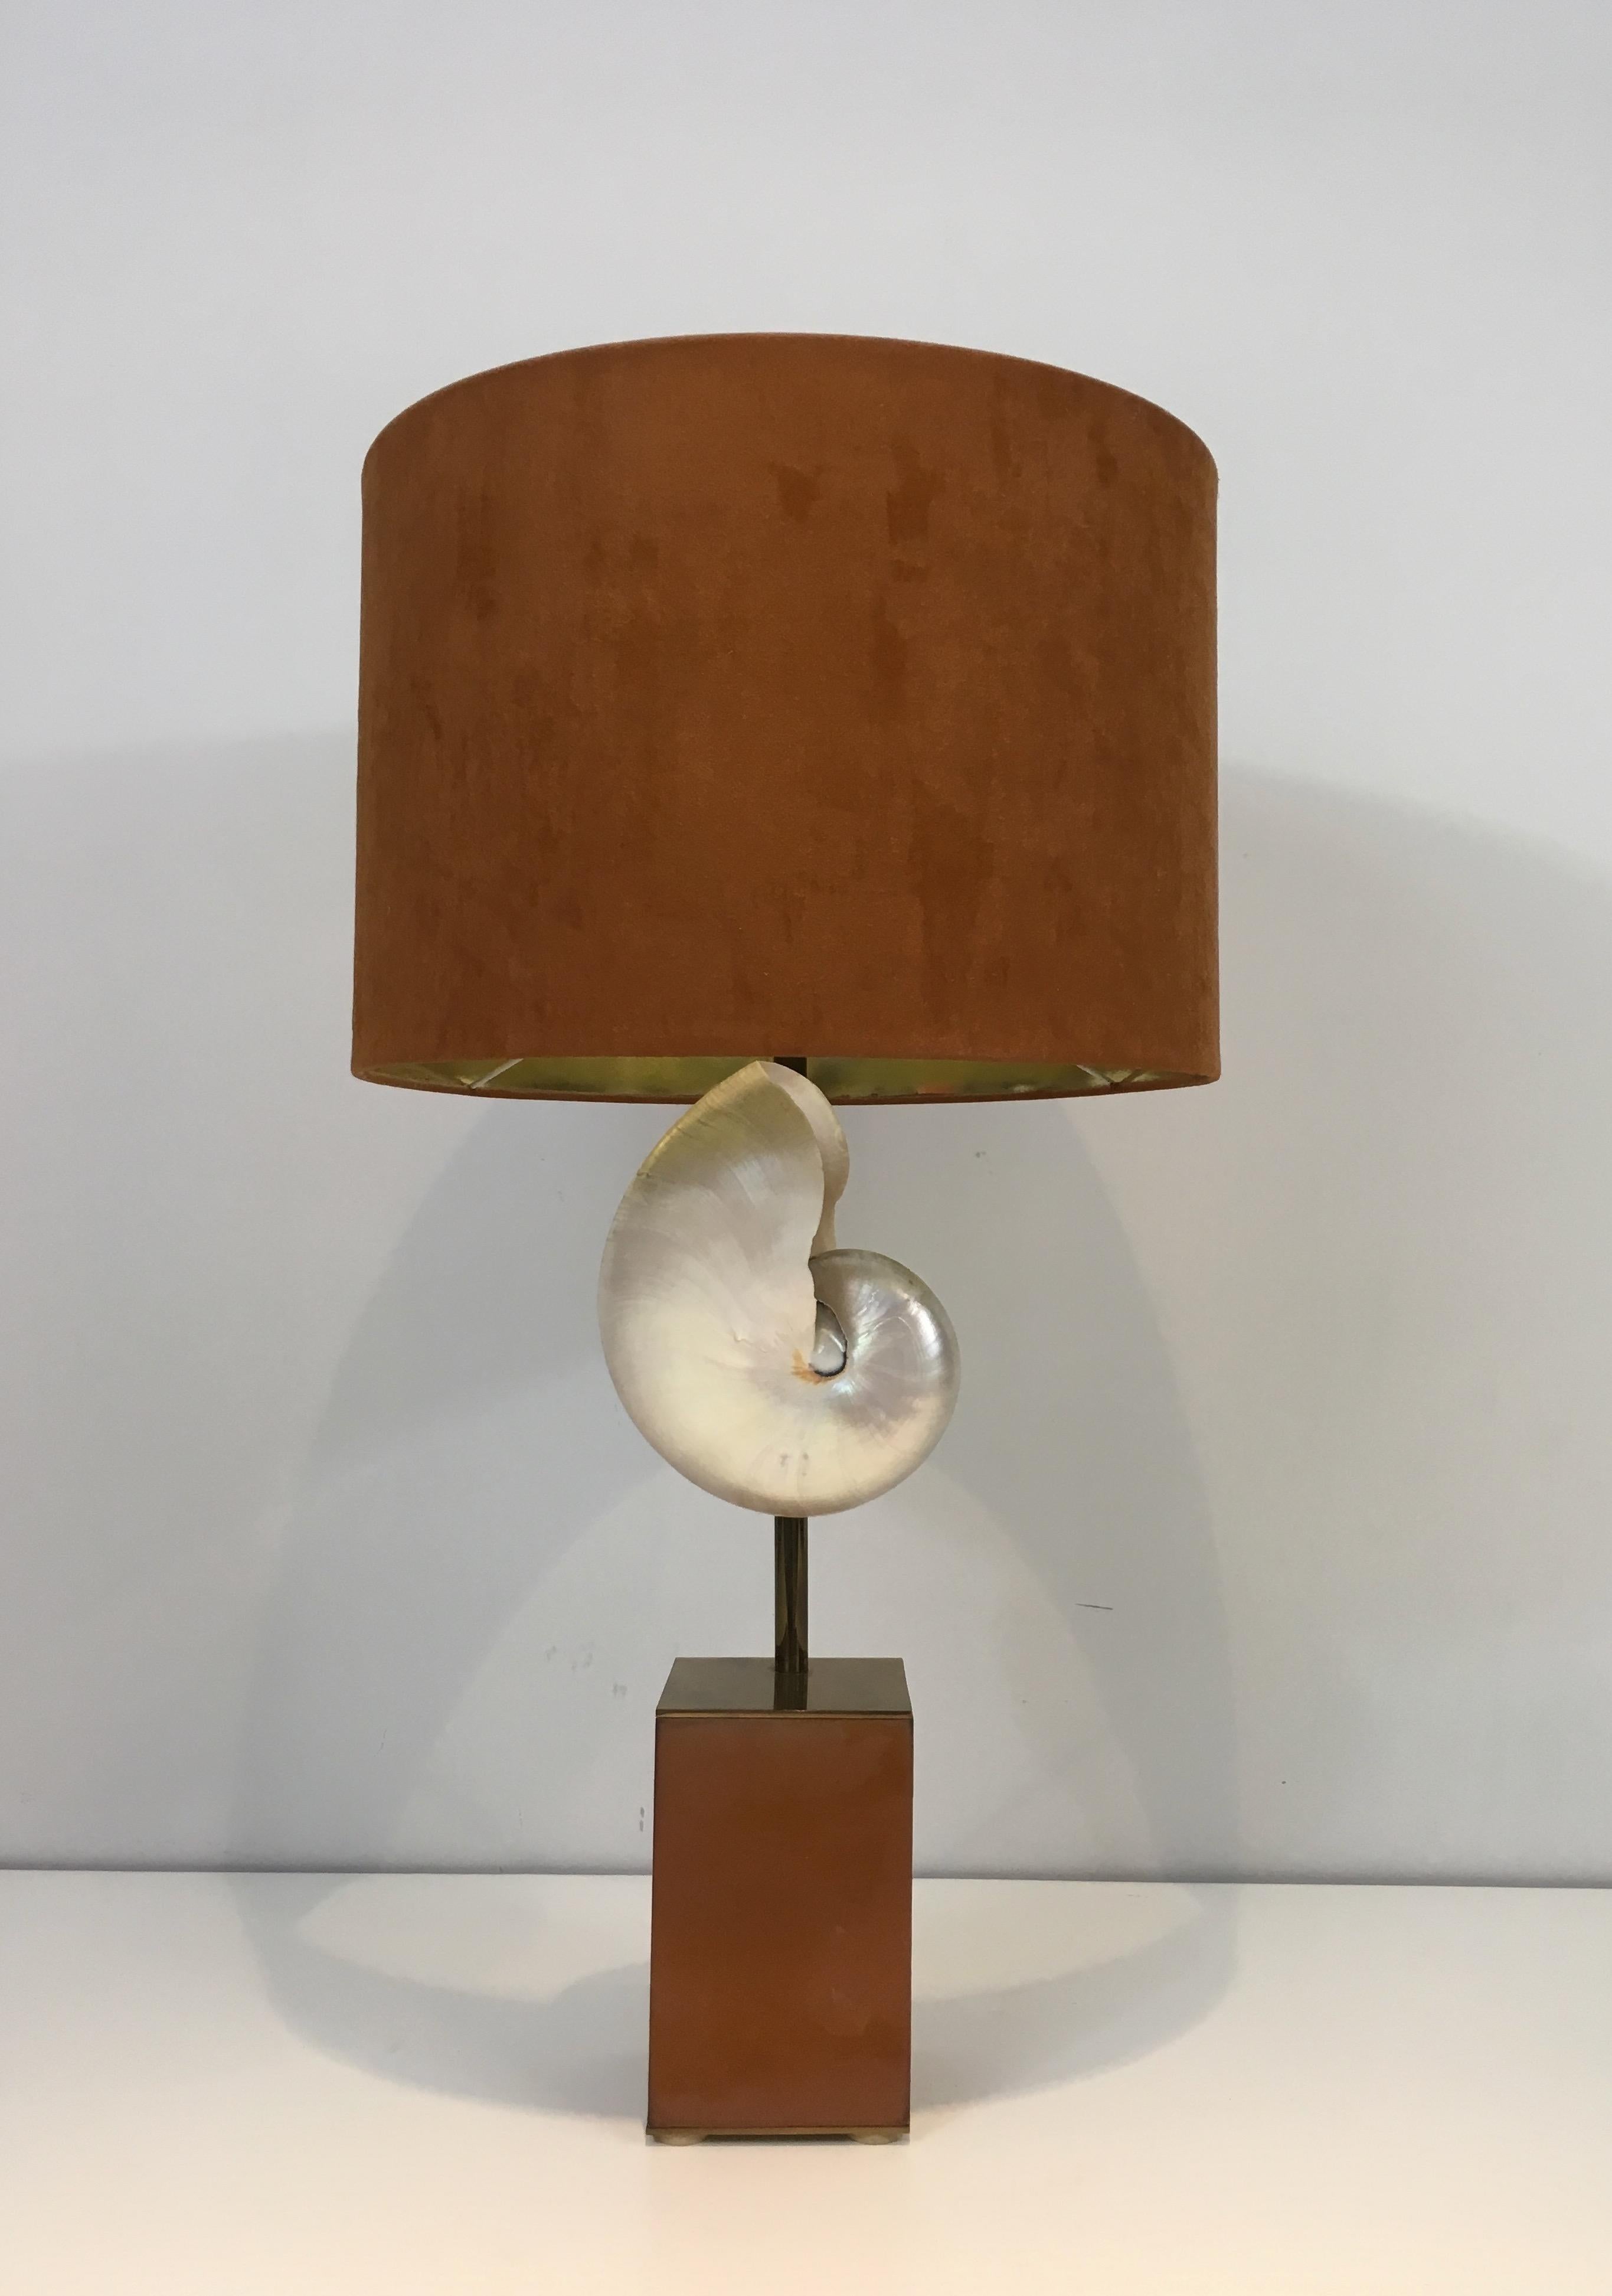 In the Style of Maison Jansen, Nautilus Shell Mounted into a Lamp im Zustand „Gut“ in Marcq-en-Barœul, Hauts-de-France